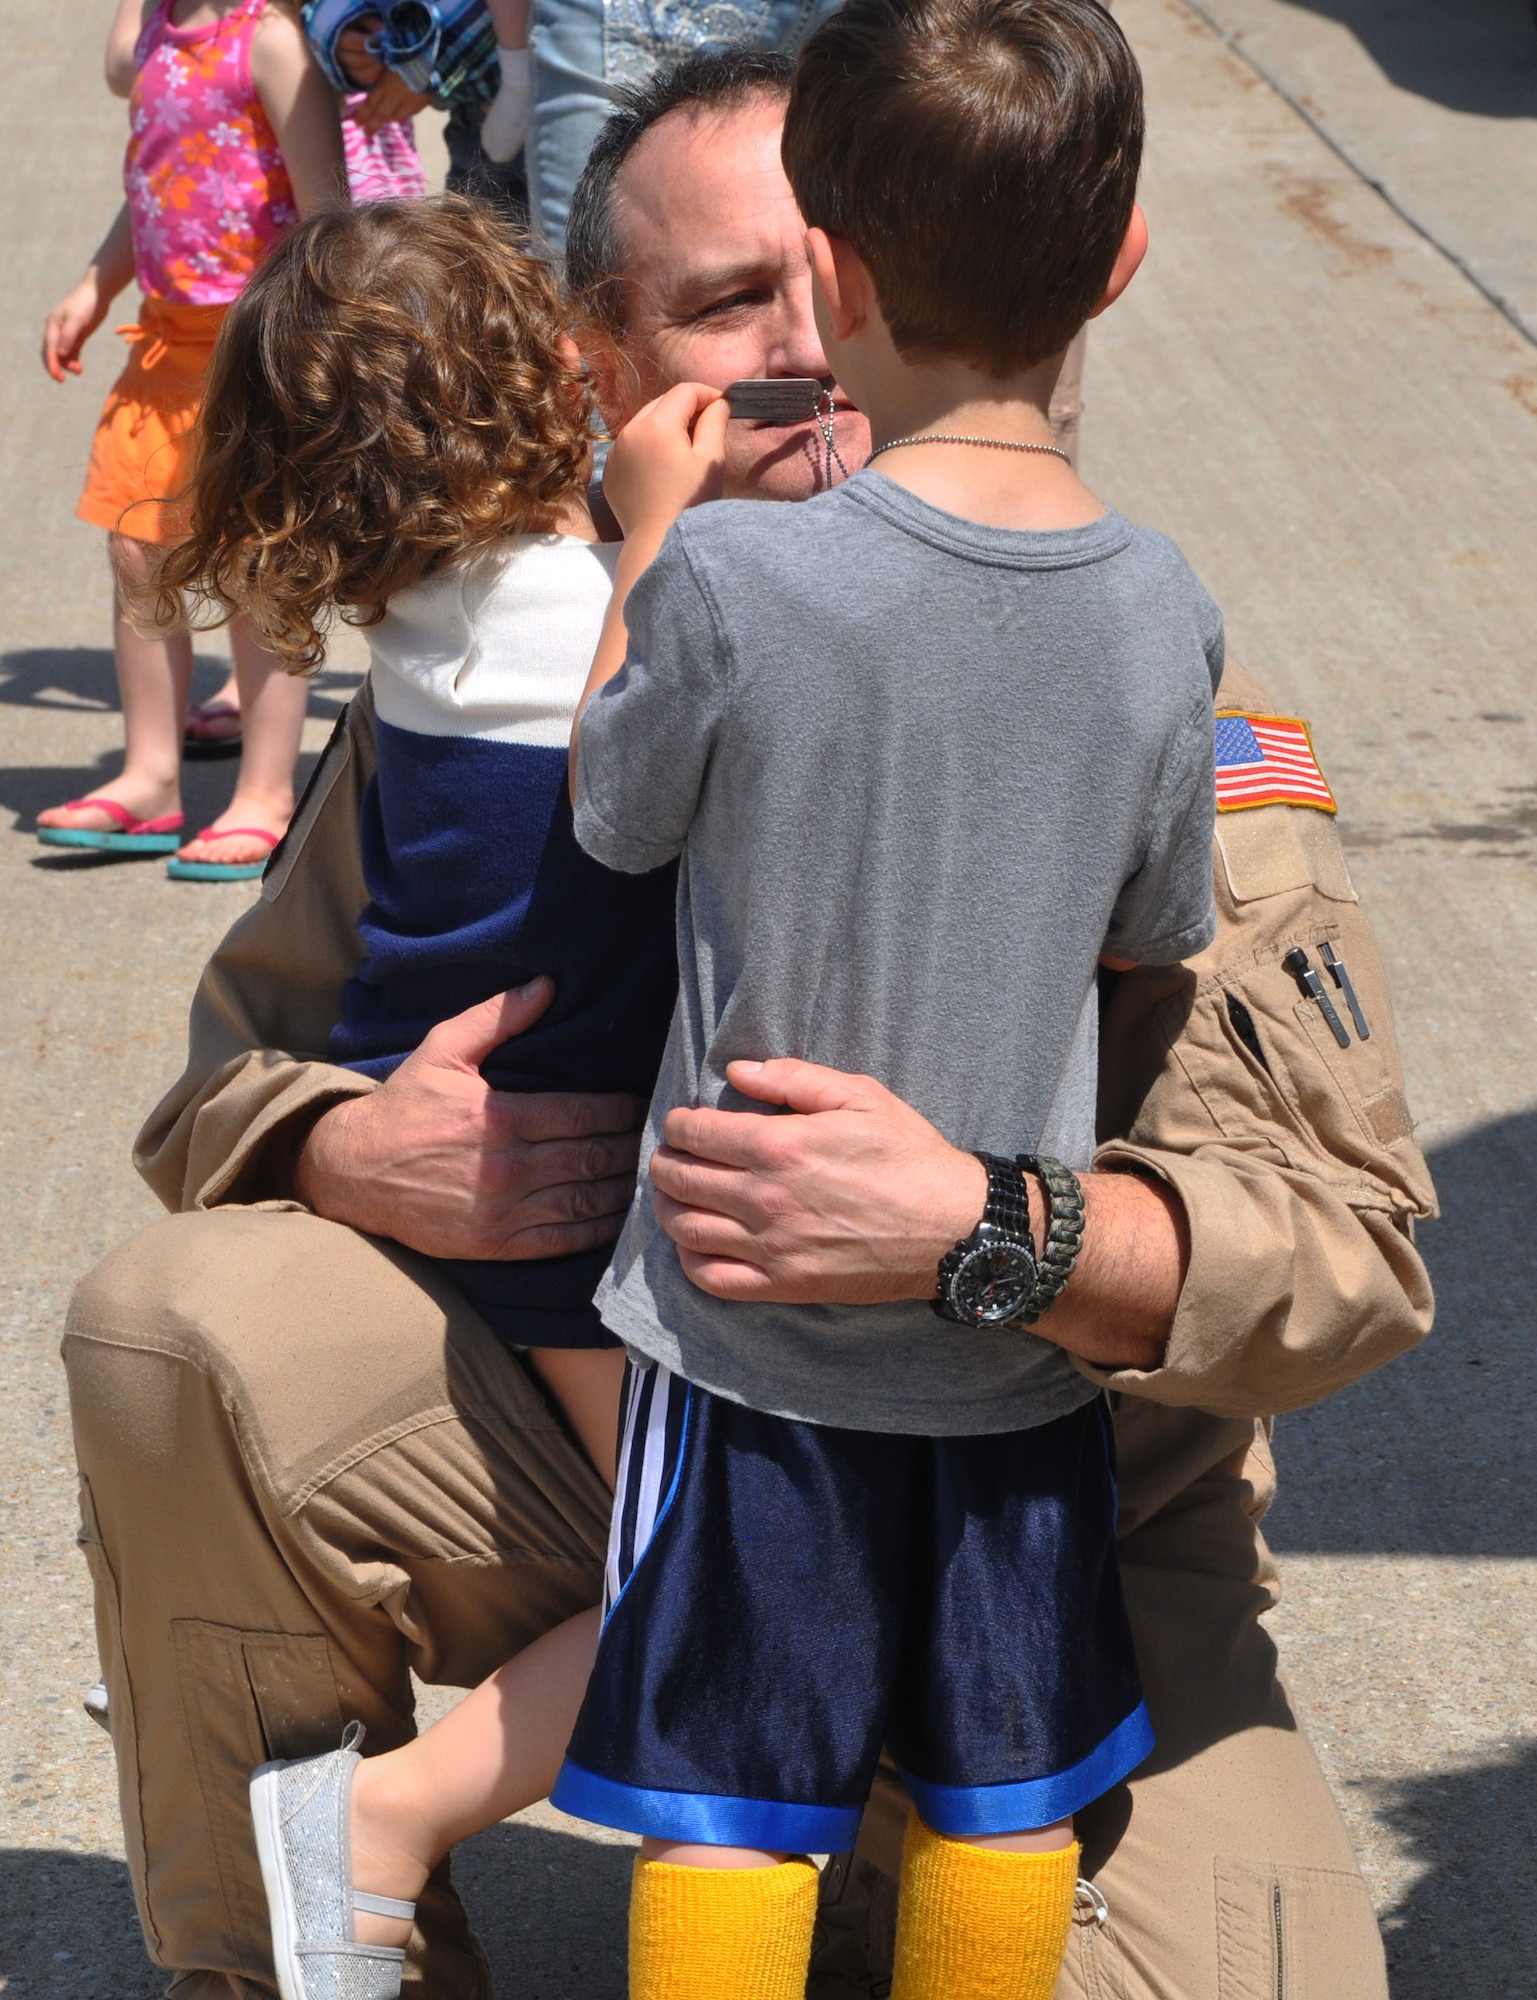 Senior Master Sgt. Brad Beyer, 18th Air Refueling Squadron boom operator, greets his children (left to right) Melody and Bryant April 16, 2015, at McConnell Air Force Base, Kan.  Beyer had just returned from a deployment to Southwest Asia, where he conducted refueling missions in support of ongoing U.S. operations overseas. (U.S. Air Force photo by Tech. Sgt. Abigail Klein)